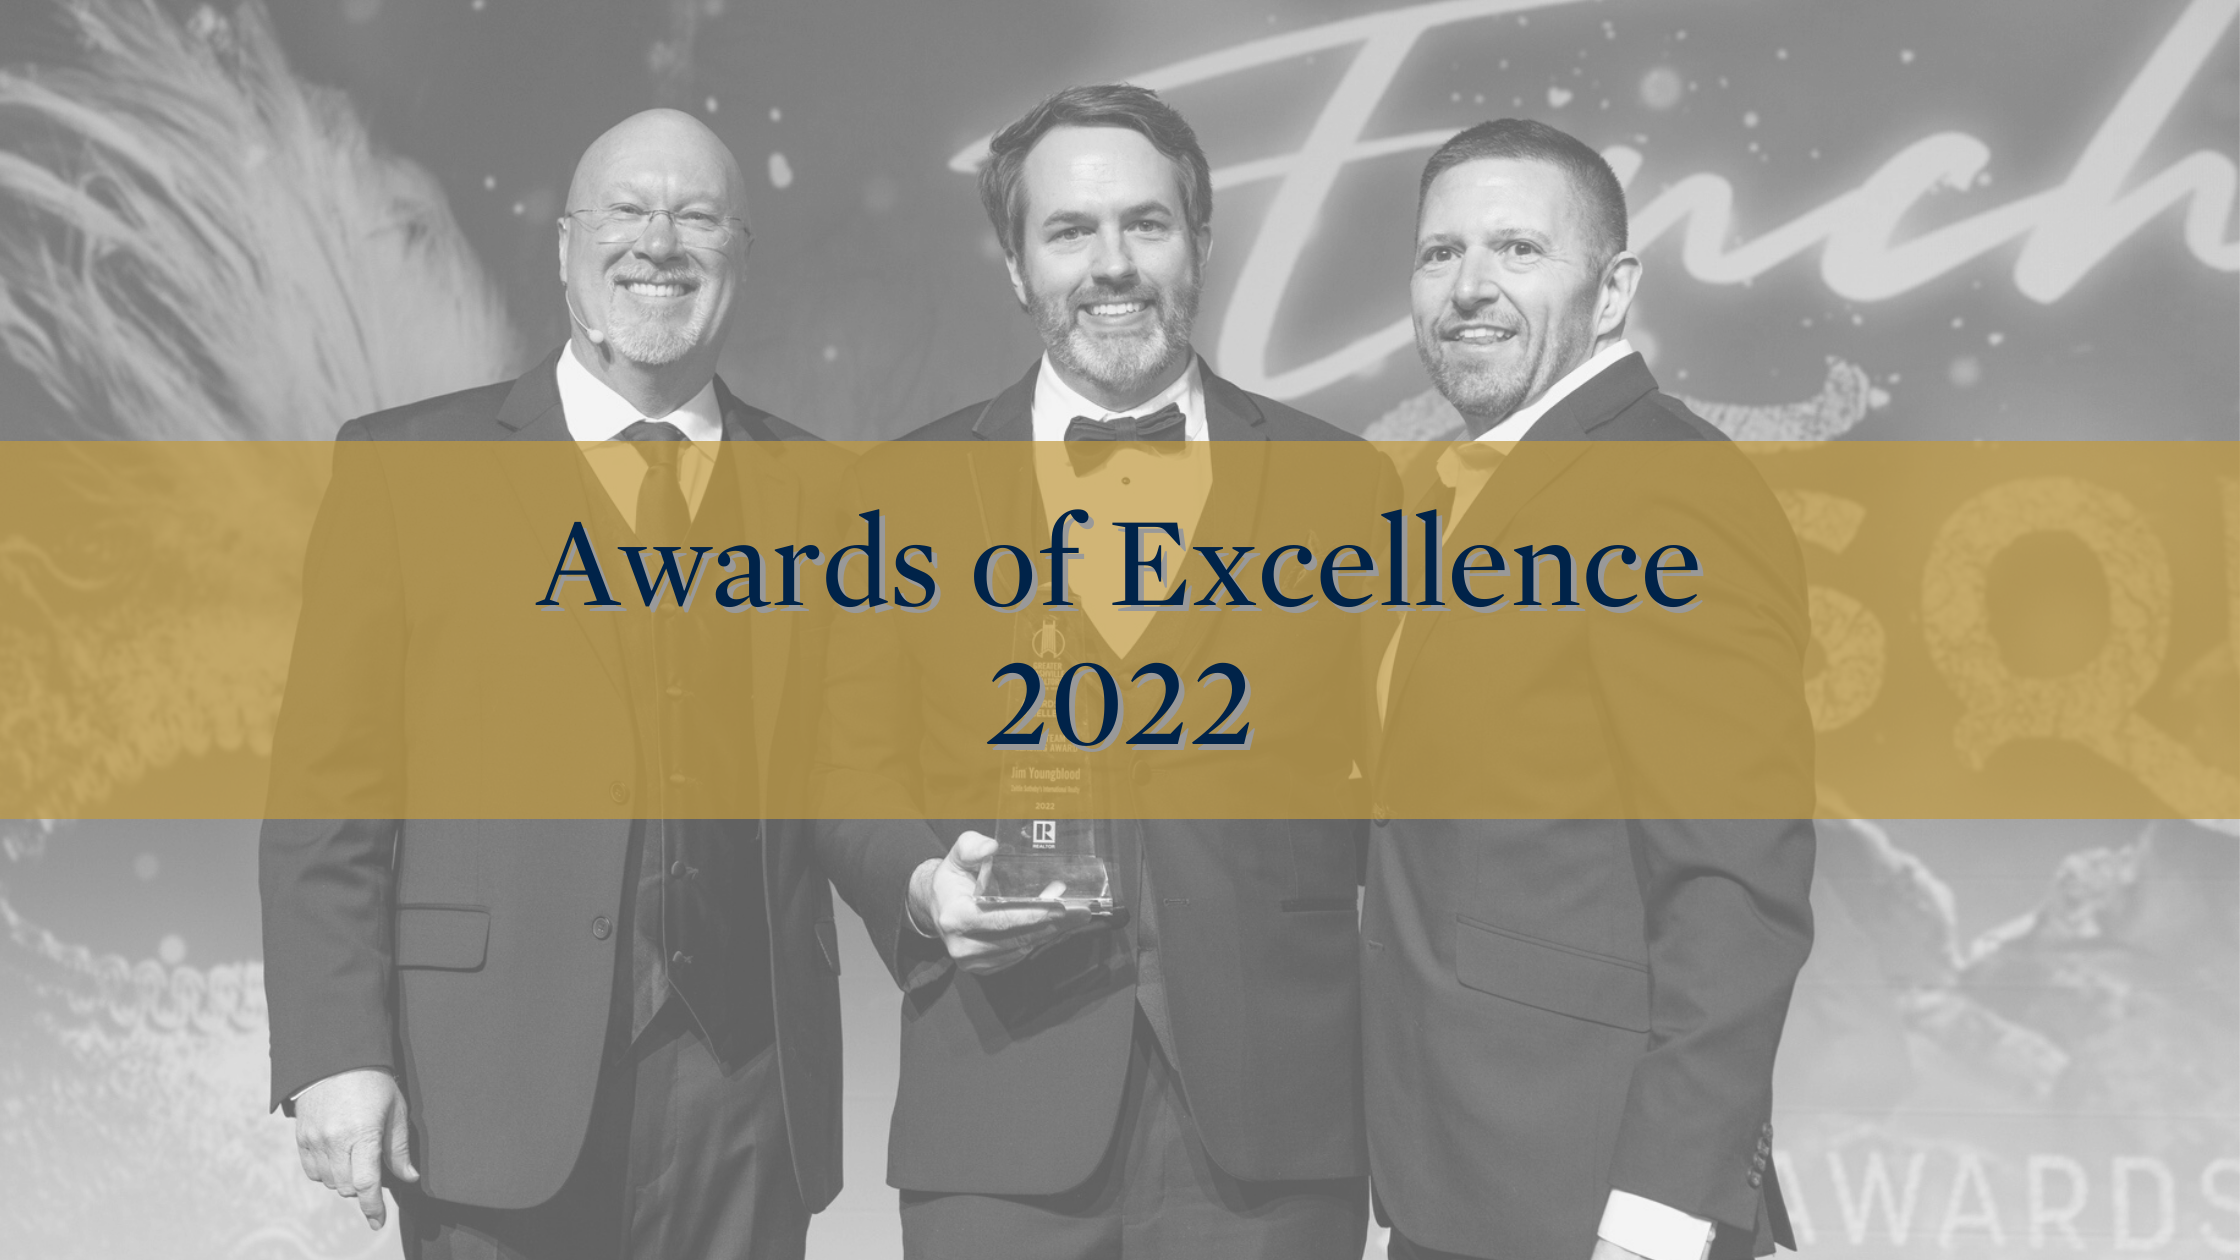 Awards of Excellence 2022 Top Leasing Award